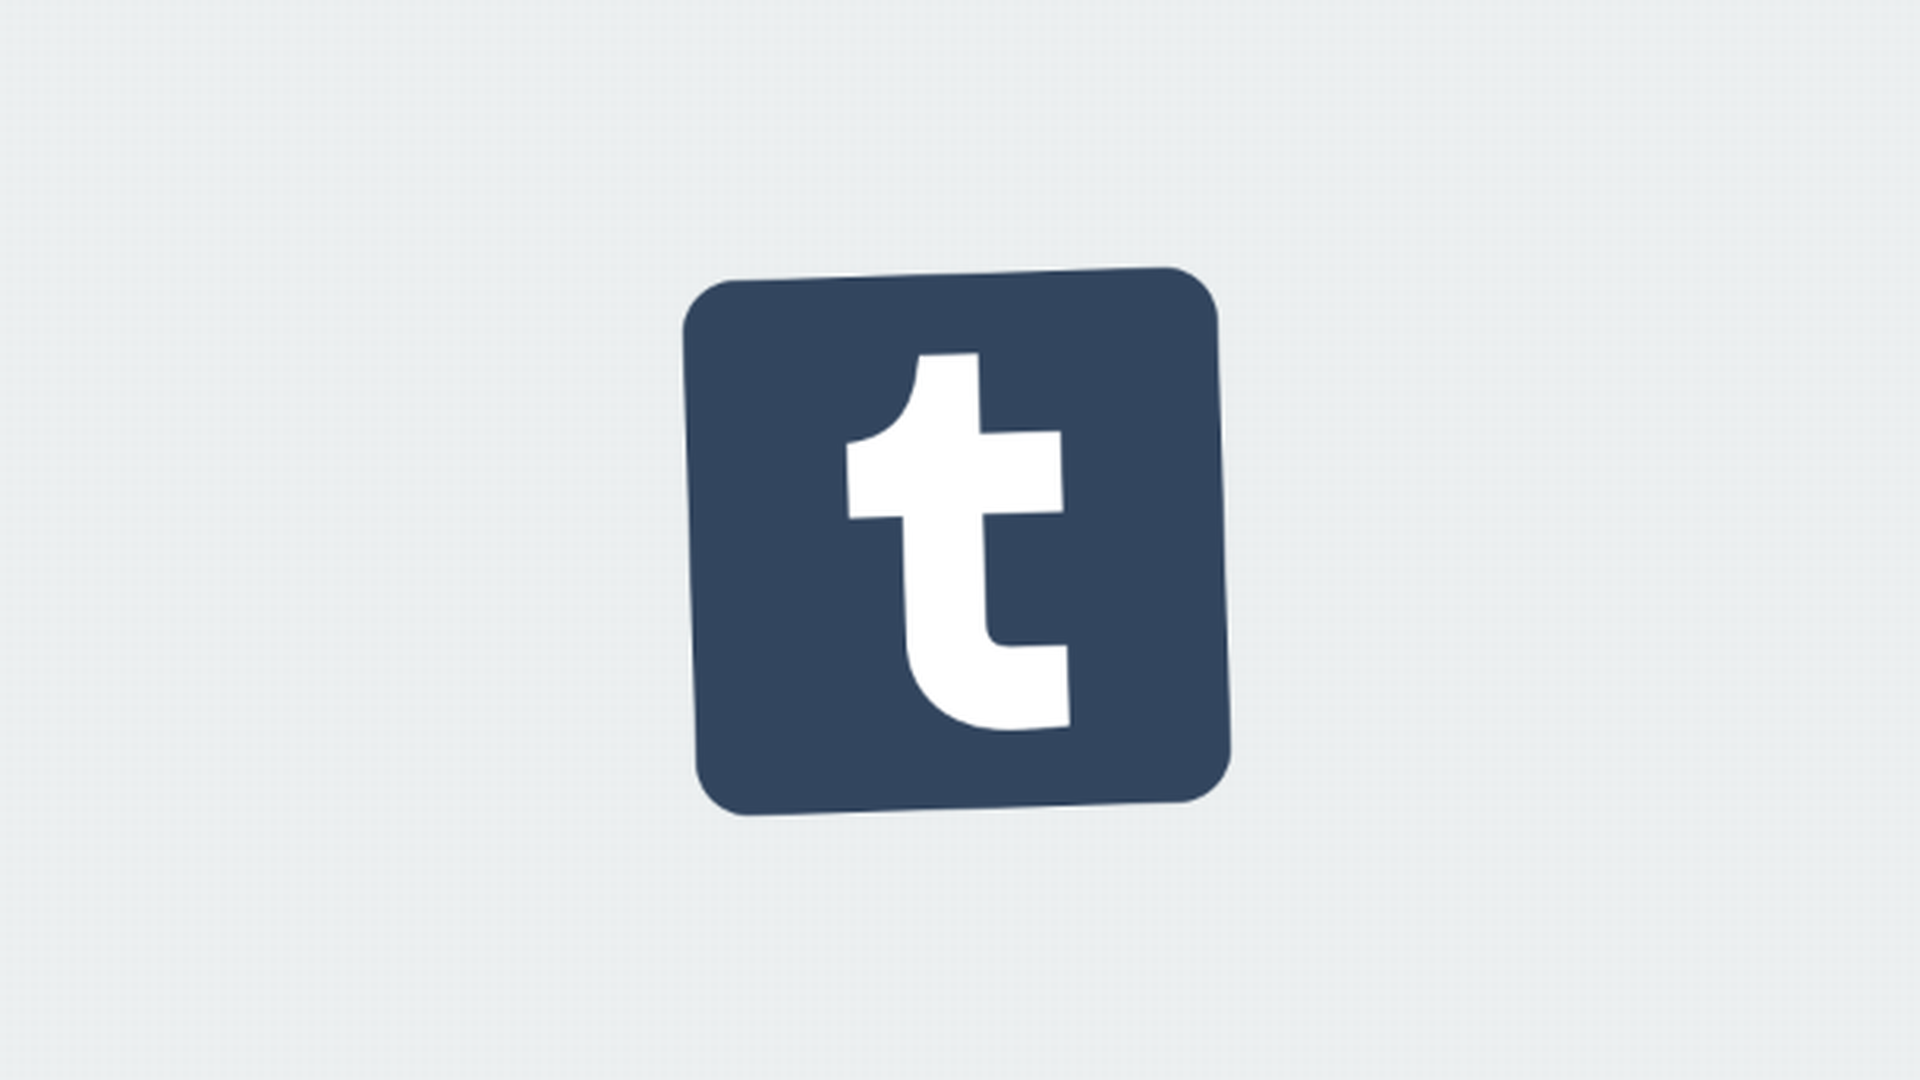 From $1.1 billion to around $3 million: A look behind the scenes at Tumblr's fall